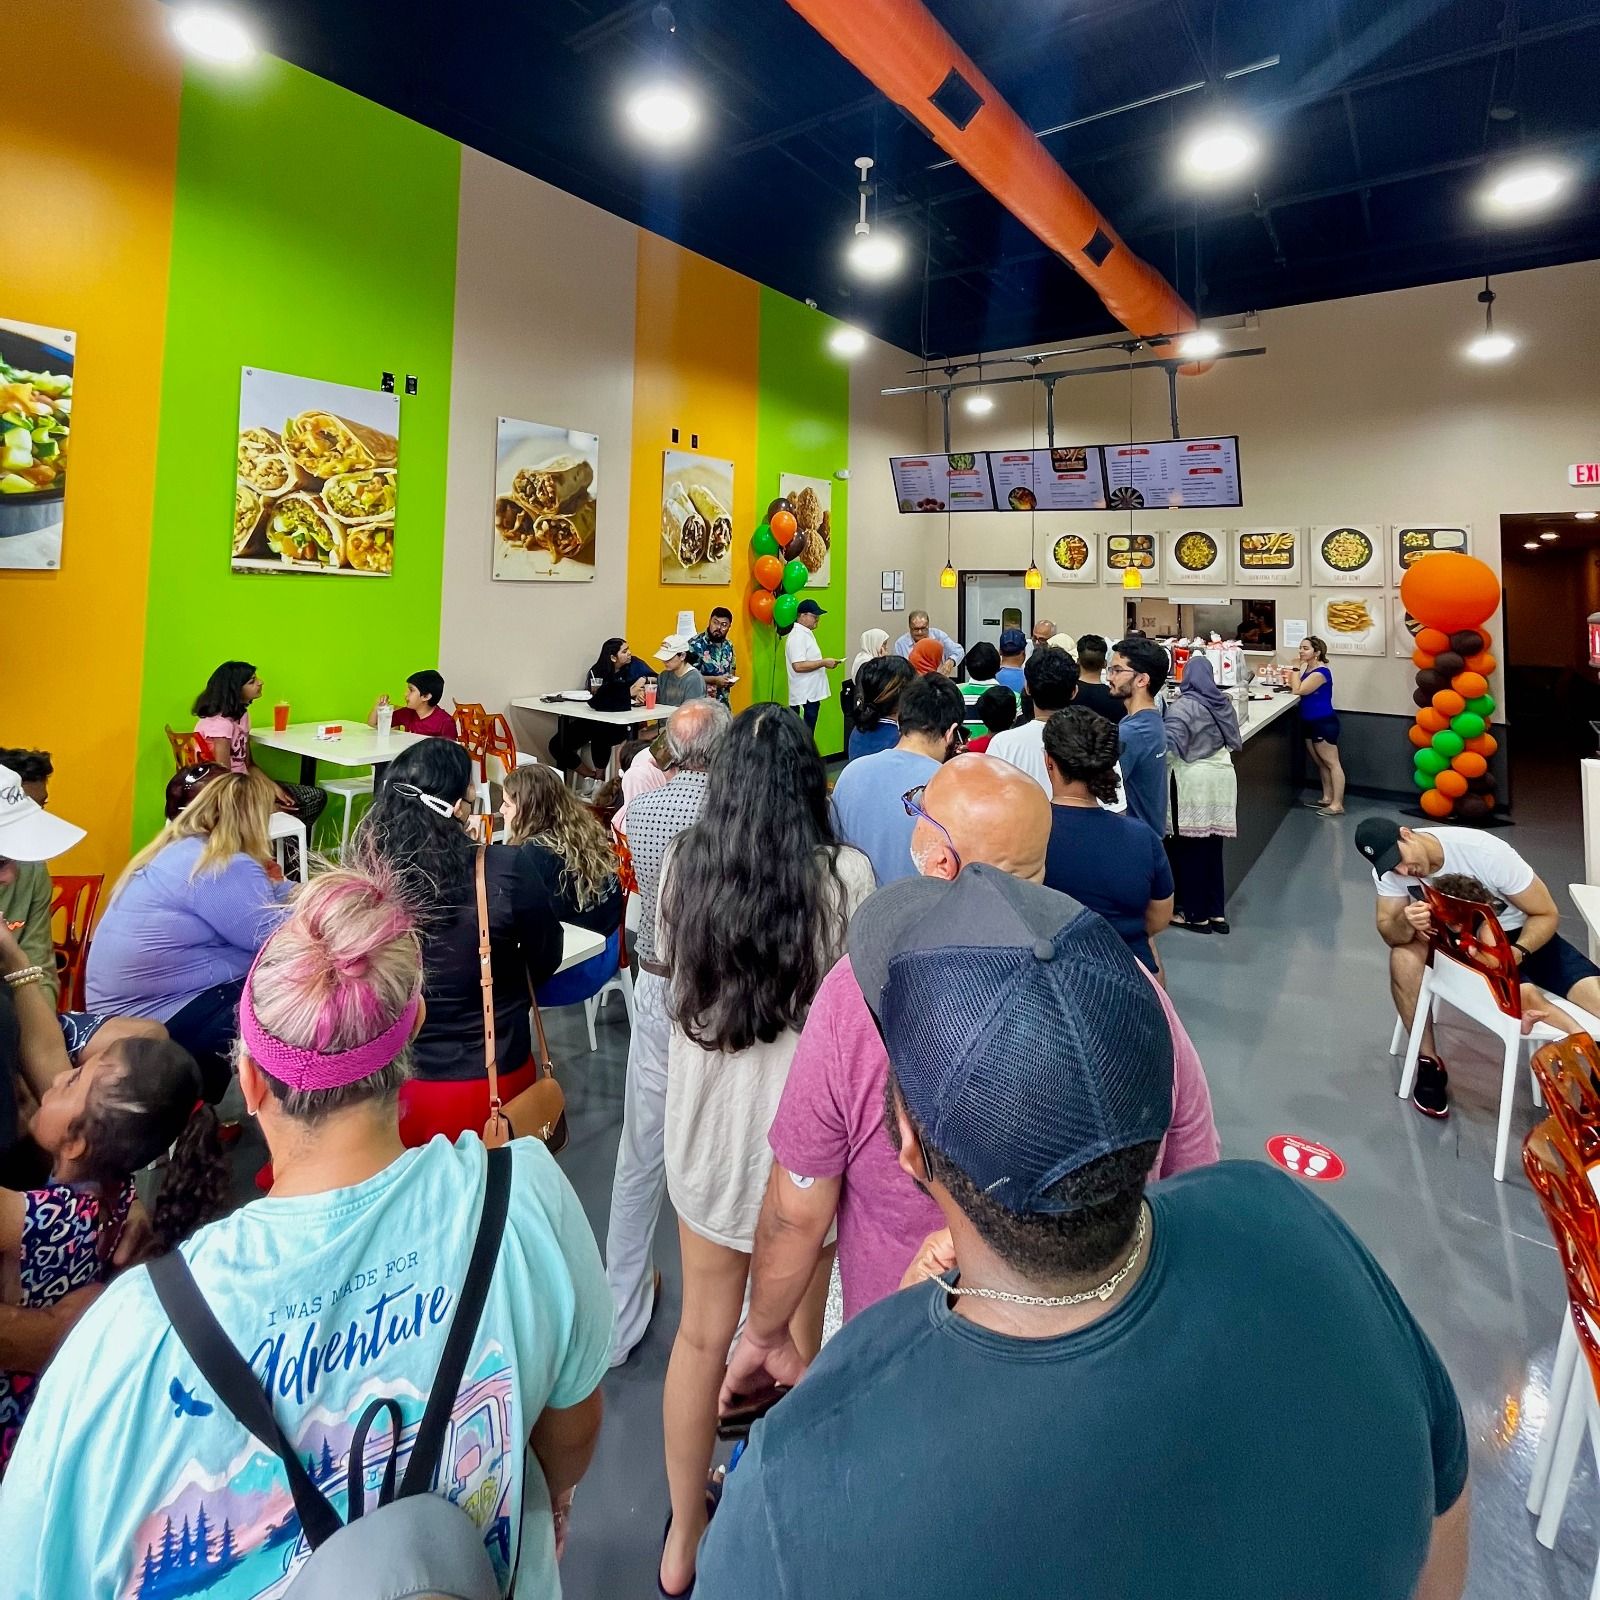 Shawarma Press Continues Expansion in Texas With Opening of Its Sixth Location in Frisco